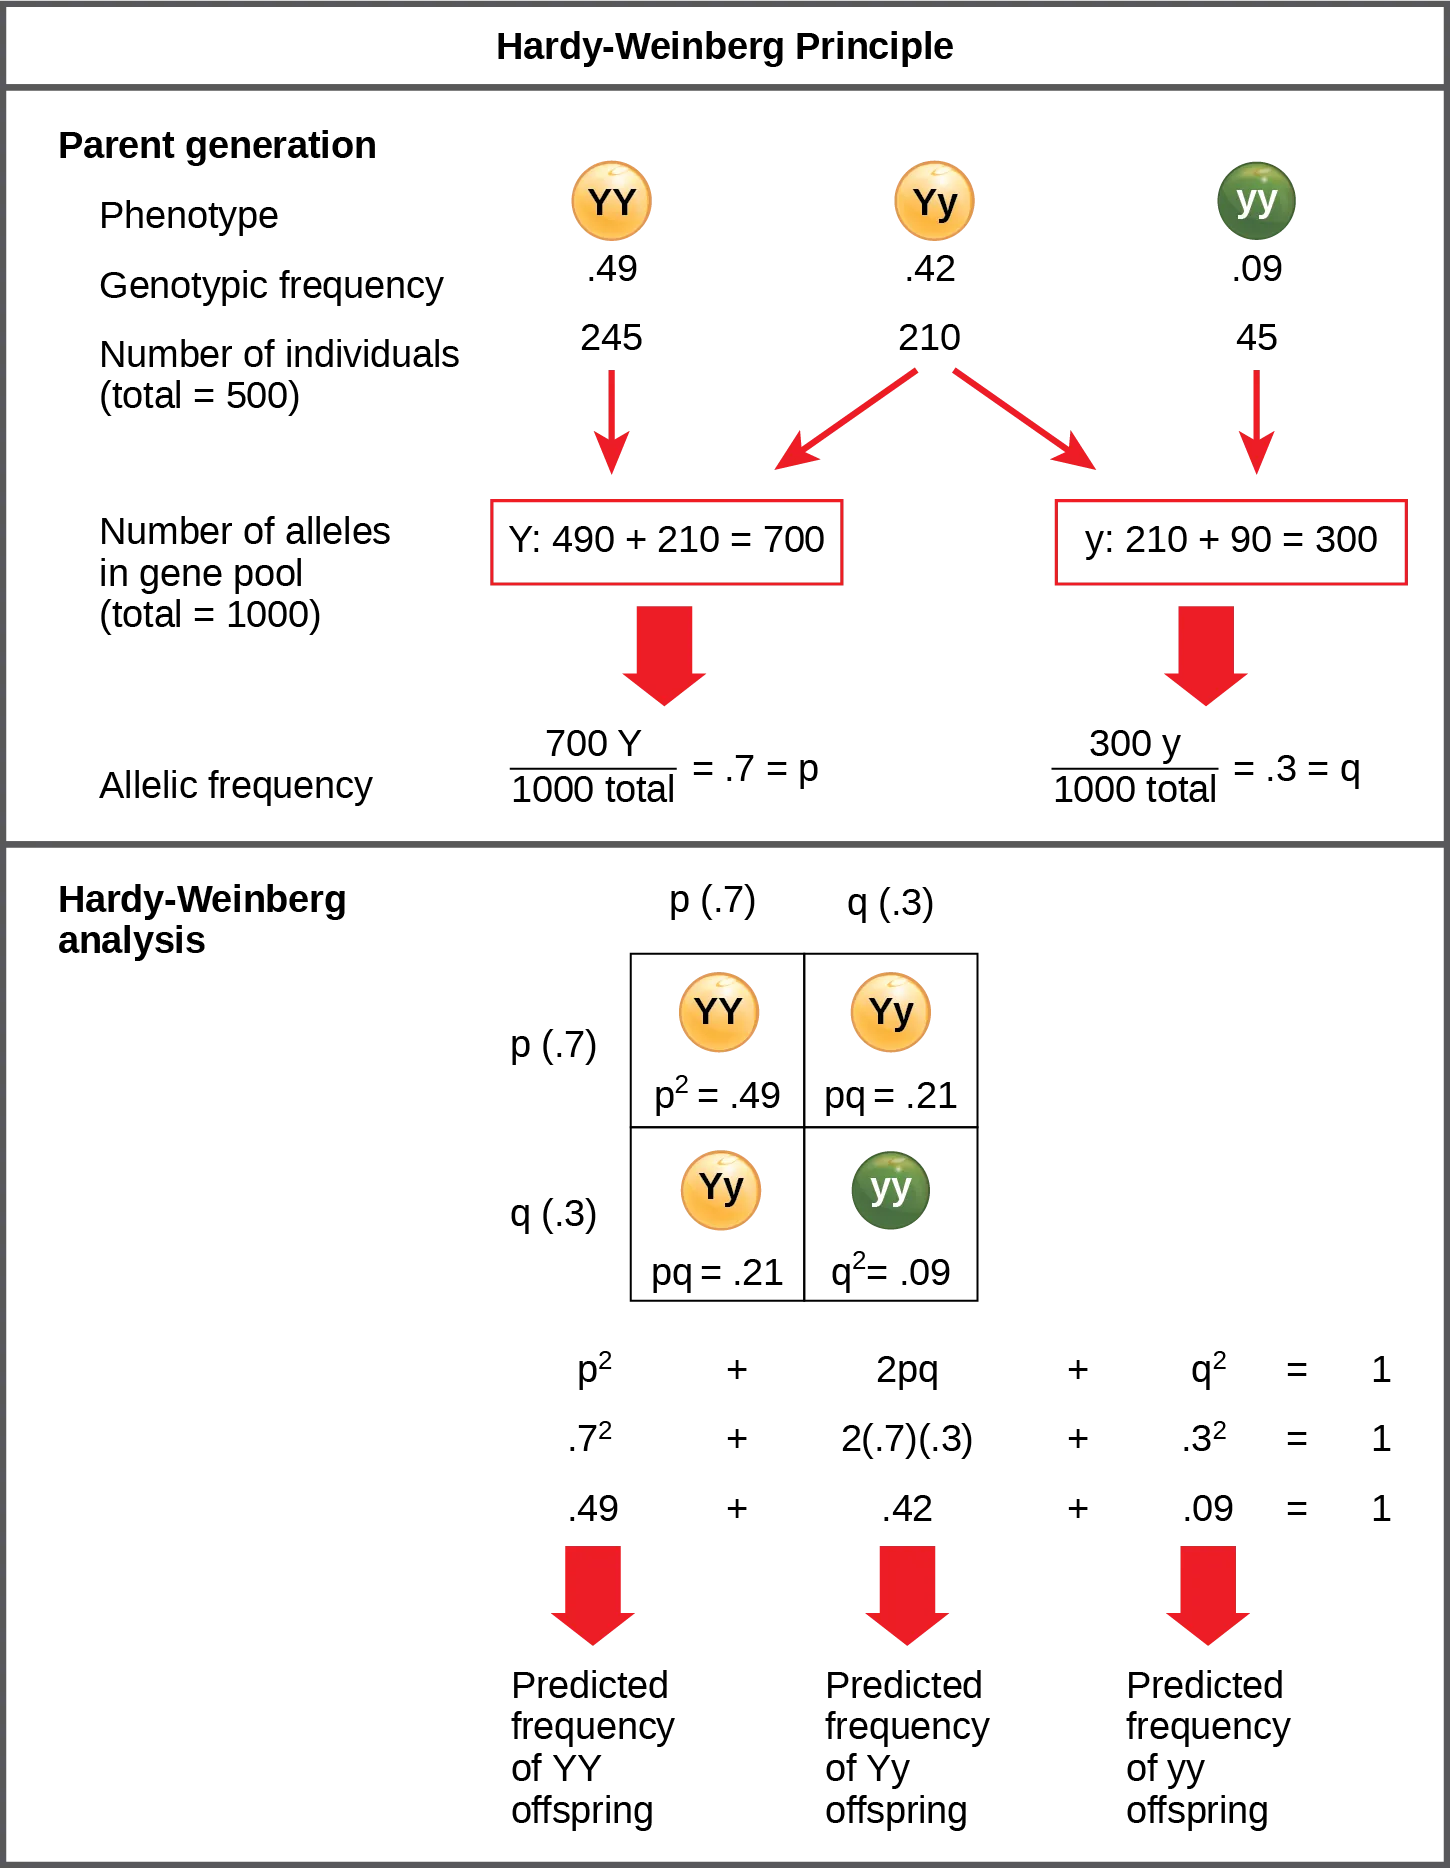 The Hardy-Weinberg principle is used to predict the genotypic distribution of offspring in a given population. In the example given, pea plants have two different alleles for pea color. The dominant capital Y allele results in yellow pea color, and the recessive small y allele results in green pea color. The distribution of individuals in a population of 500 is given. Of the 500 individuals, 245 are homozygous dominant (capital Y capital Y) and produce yellow peas. 210 are heterozygous (capital Y small y) and also produce yellow peas. 45 are homozygous recessive (small y small y) and produce green peas. The frequencies of homozygous dominant, heterozygous, and homozygous recessive individuals are 0.49, 0.42, and 0.09, respectively. Each of the 500 individuals provides two alleles to the gene pool, or 1000 total. The 245 homozygous dominant individuals provide two capital Y alleles to the gene pool, or 490 total. The 210 heterozygous individuals provide 210 capital Y and 210 small y alleles to the gene pool. The 45 homozygous recessive individuals provide two small y alleles to the gene pool, or 90 total. The number of capital Y alleles is 490 from homozygous dominant individuals plus 210 from homozygous recessive individuals, or 700 total. The number of small y alleles is 210 from heterozygous individuals plus 90 from homozygous recessive individuals, or 300 total. The allelic frequency is calculated by dividing the number of each allele by the total number of alleles in the gene pool. For the capital Y allele, the allelic frequency is 700 divided by 1000, or 0.7; this allelic frequency is called p. For the small y allele the allelic frequency is 300 divided by 1000, or 0.3; the allelic frequency is called q. Hardy-Weinberg analysis is used to determine the genotypic frequency in the offspring. The Hardy-Wienberg equation is p-squared plus 2pq plus q-squared equals 1. For the population given, the frequency is 0.7-squared plus 2 times .7 times .3 plus .3-squared equals one. The value for p-squared, 0.49, is the predicted frequency of homozygous dominant (capital Y capital Y) individuals. The value for 2pq, 0.42, is the predicted frequency of heterozygous (capital Y small y) individuals. The value for q-squared, .09, is the predicted frequency of homozygous recessive individuals. Note that the predicted frequency of genotypes in the offspring is the same as the frequency of genotypes in the parent population. If all the genotypic frequencies, .49 plus .42 plus .09, are added together, the result is one 